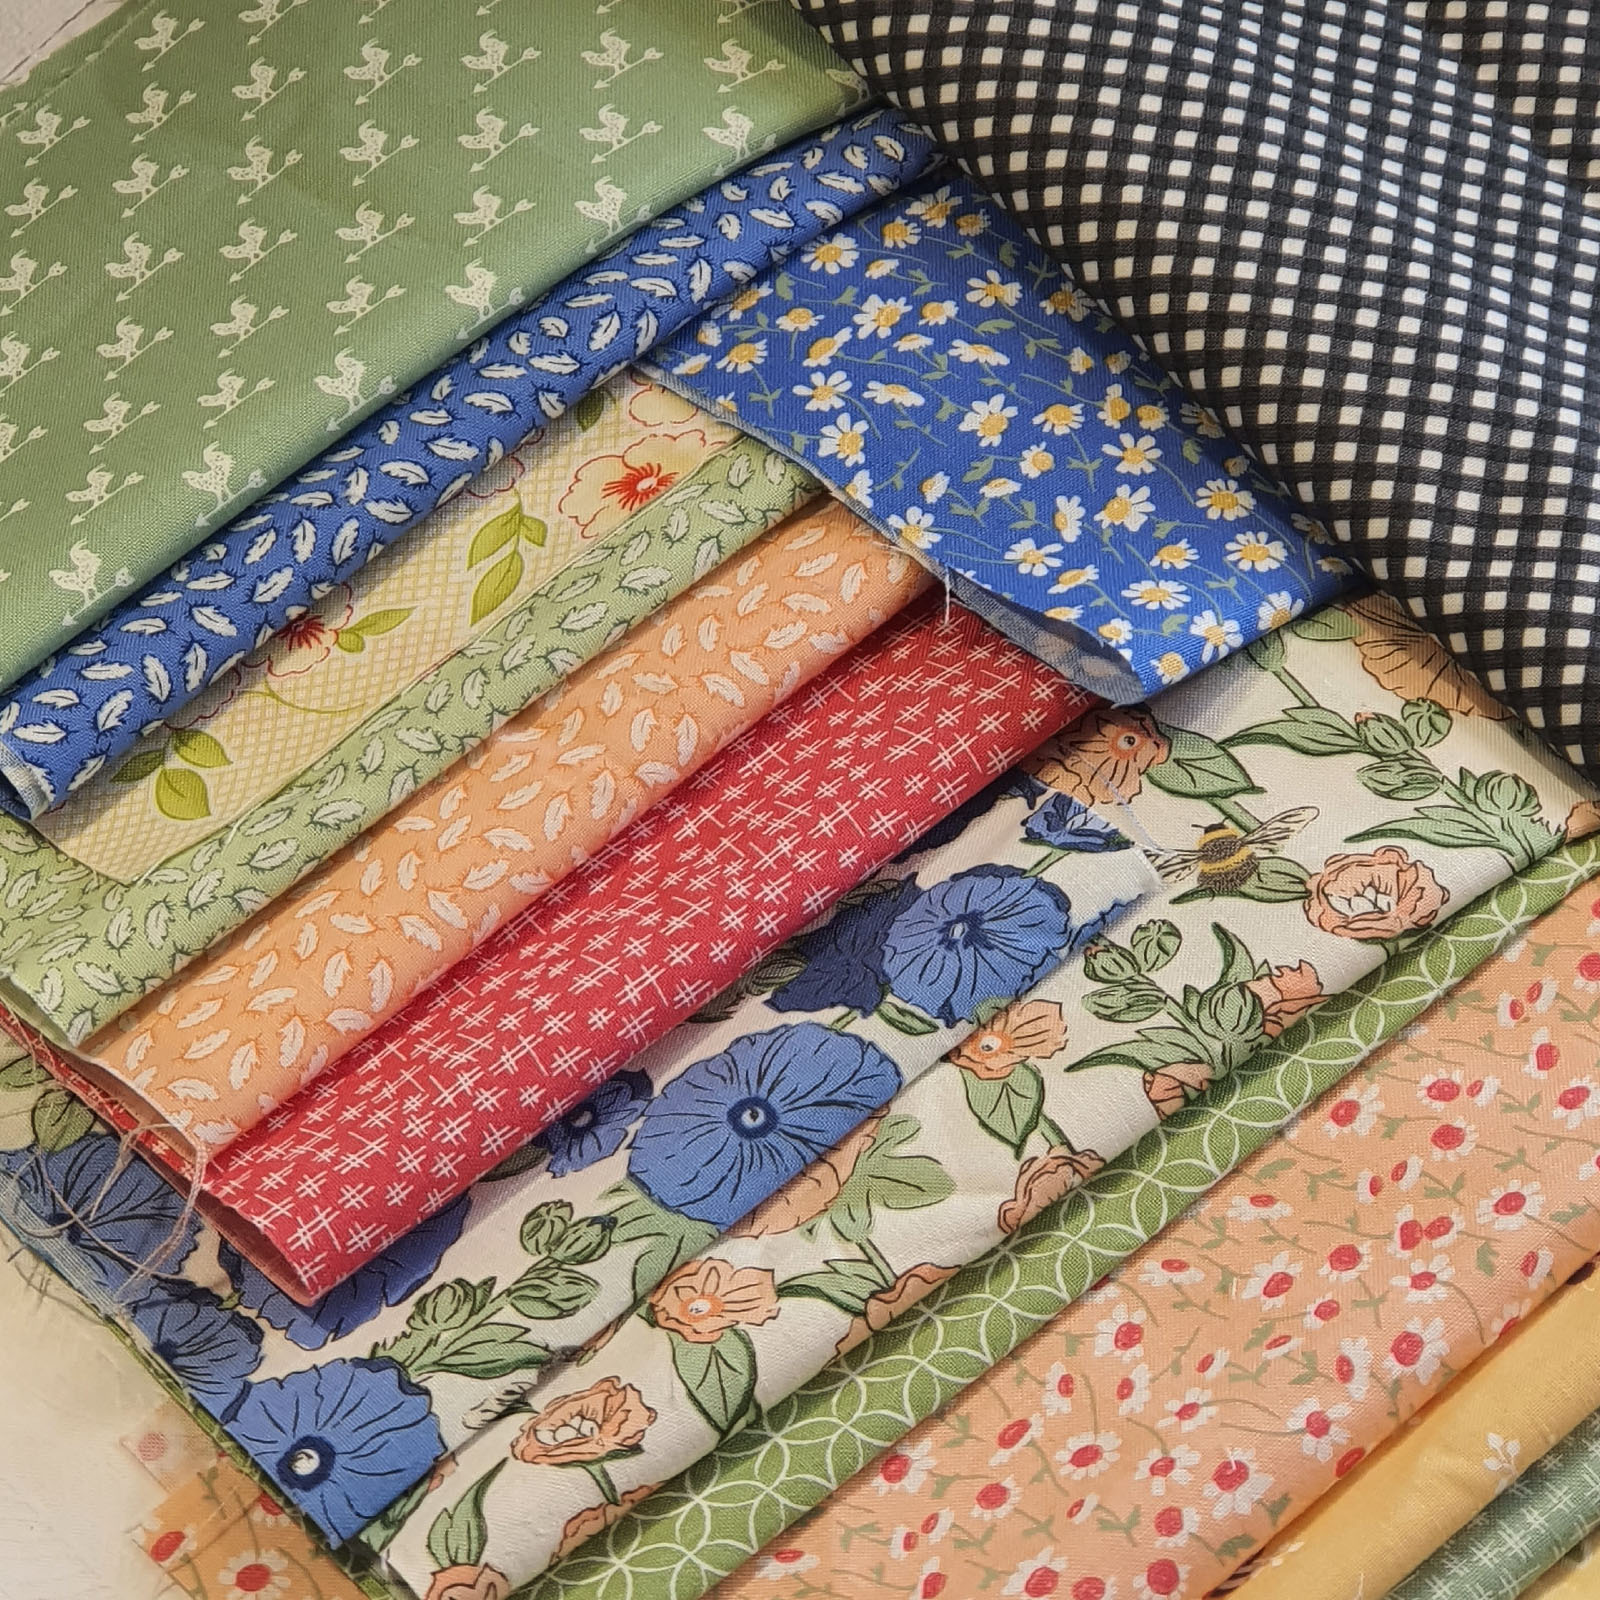 Selection of fabrics for the spring quilt